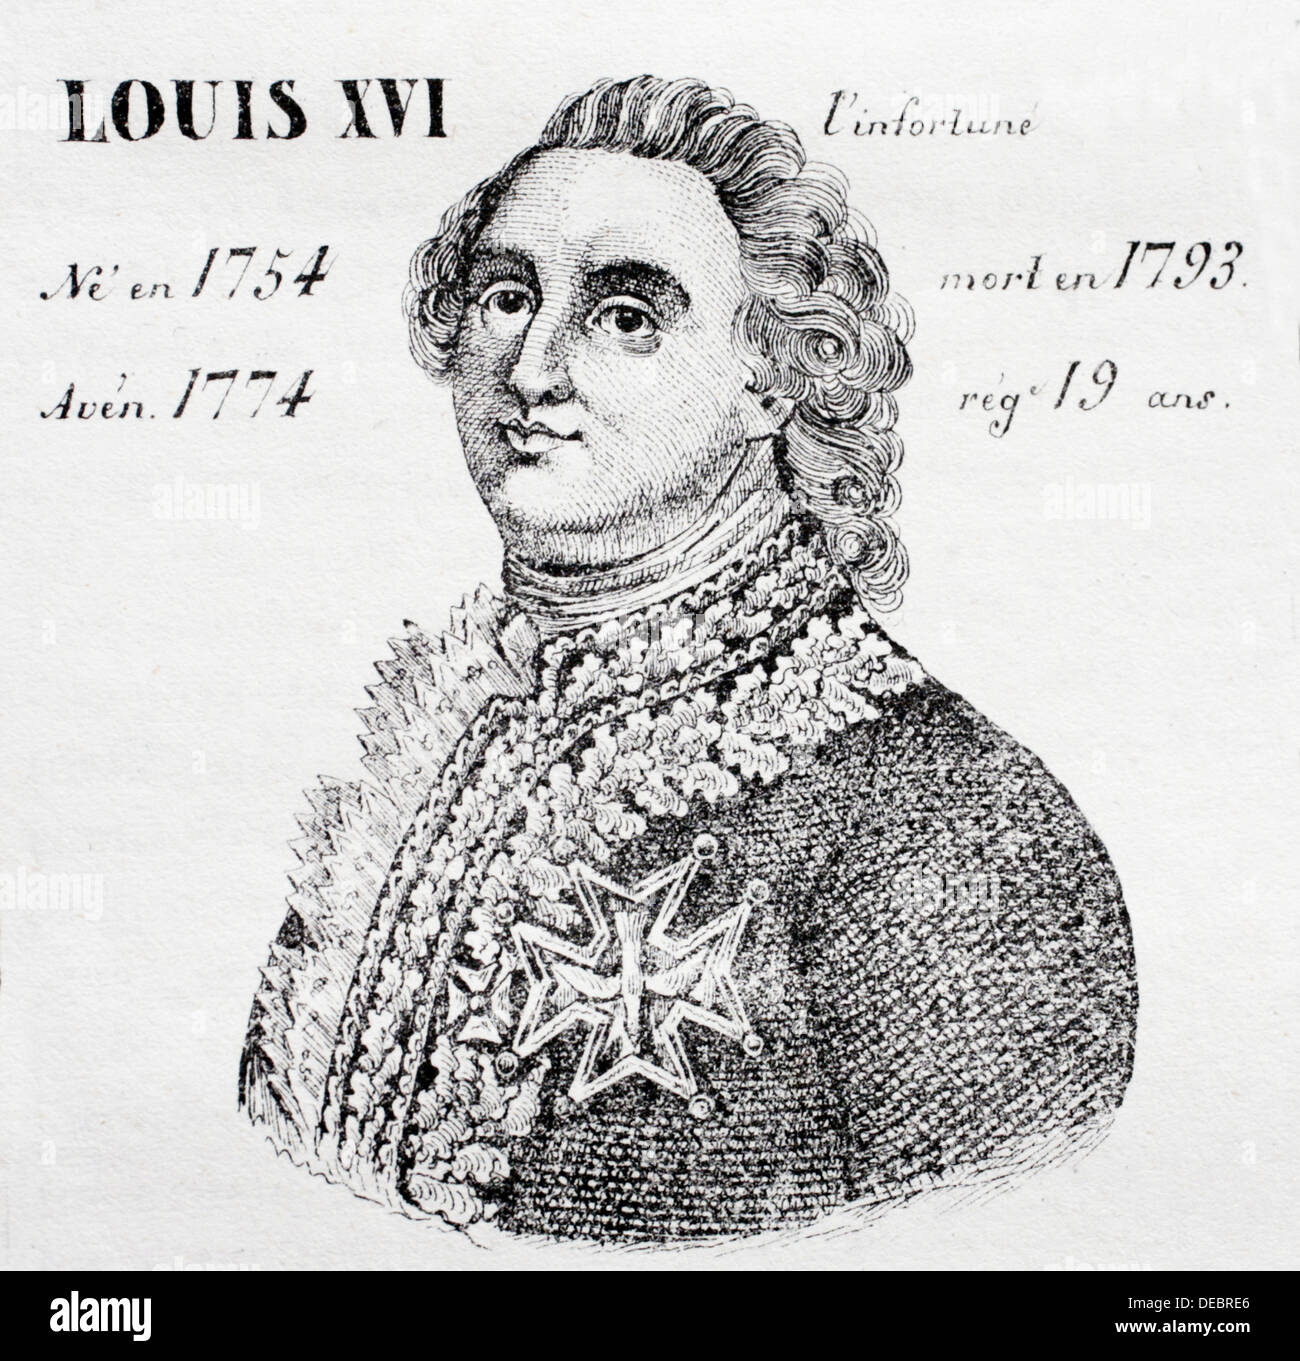 Louis XVI, l´infortuné., king of France from 1774 to 1793. History of France, by  J.Henry (Paris, 1842) Stock Photo